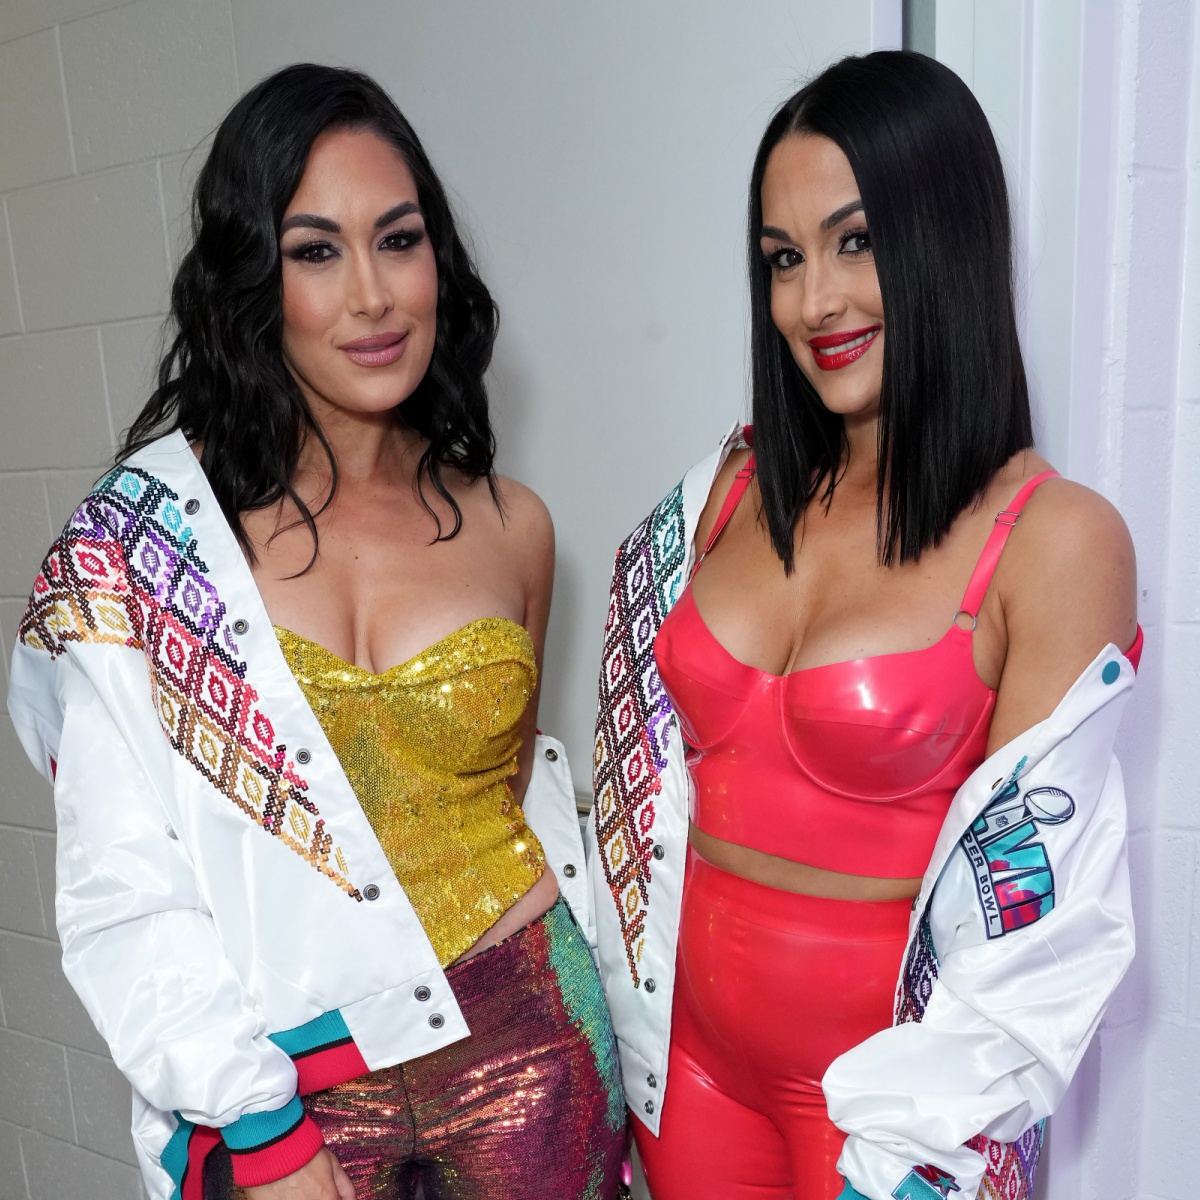 Nikki Bella Wwe Xnxx Com - Nikki and Brie Bella Are Exiting WWE and Ditching Their Ring Names - E!  Online